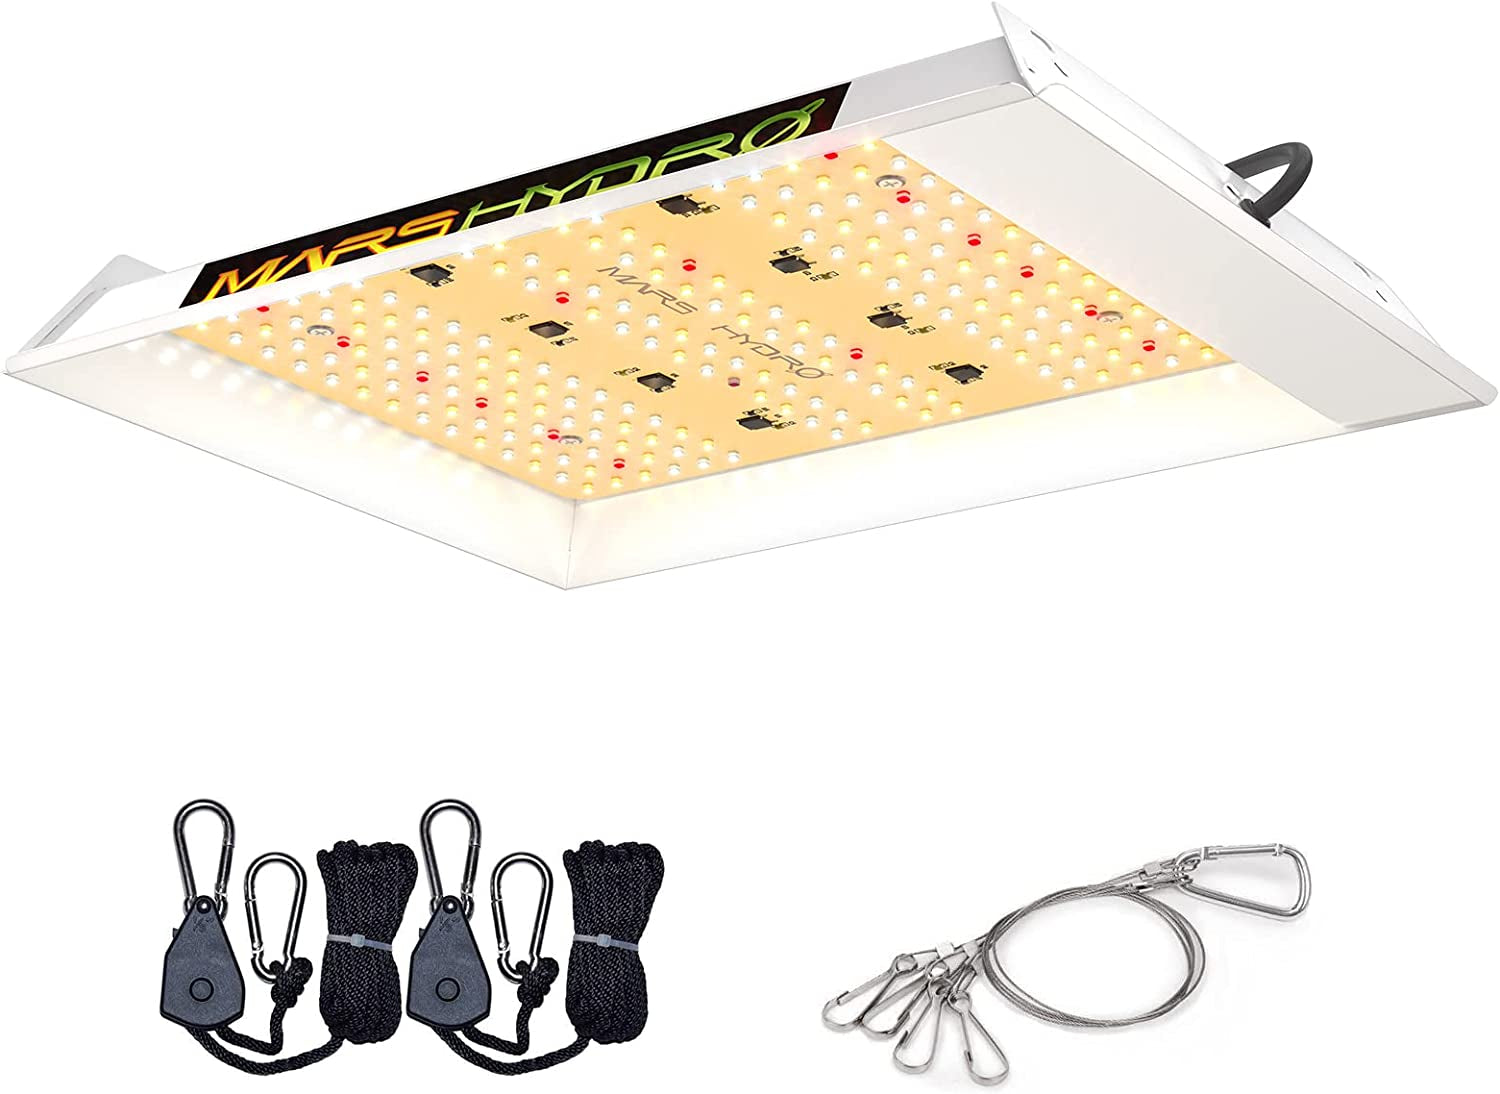 MARS HYDRO, MARS HYDRO TS 600 LED Grow Light Full Spectrum 100W Grow Lamp for Hydroponic Indoor Plant Seeding Veg and Bloom Greenhouse Growing Light Fixtures for 2X2Ft Coverage,